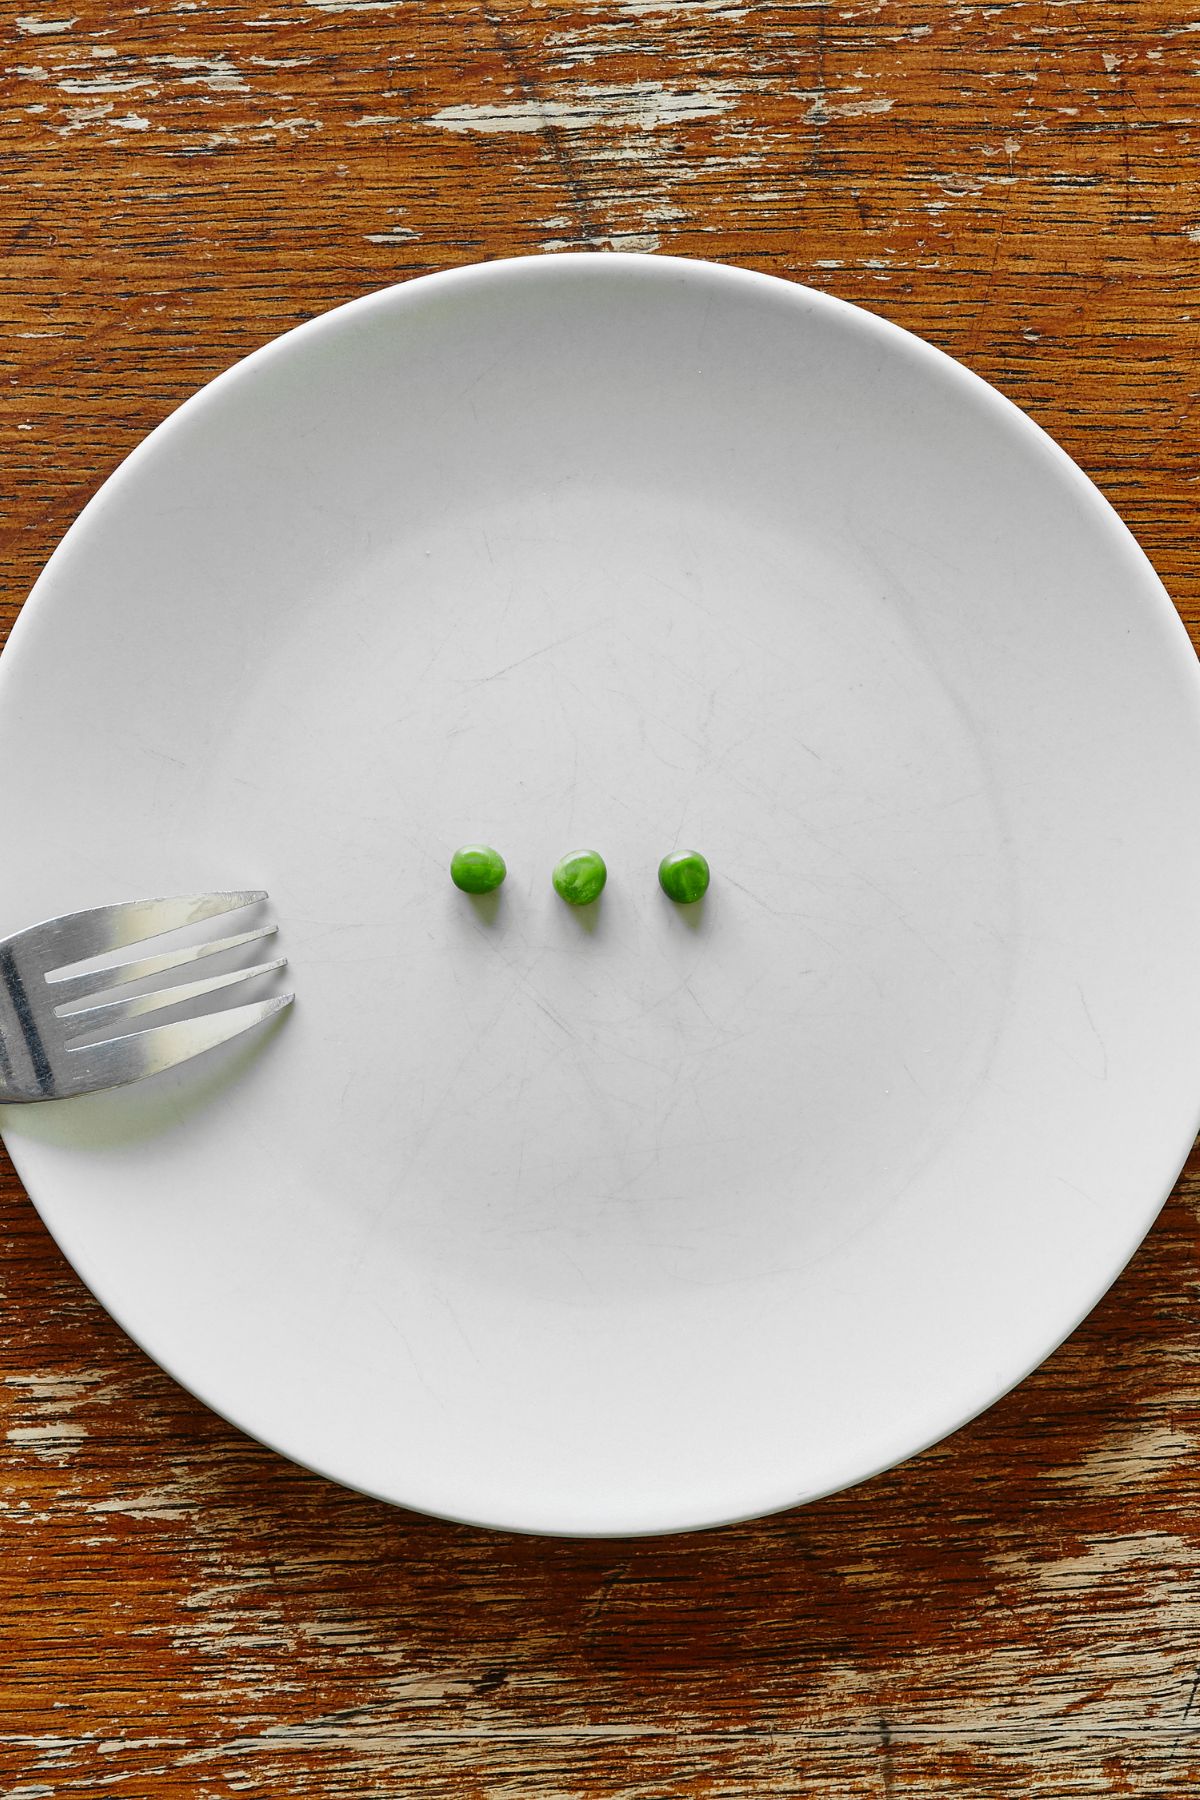 a small portion of peas on a white plate.